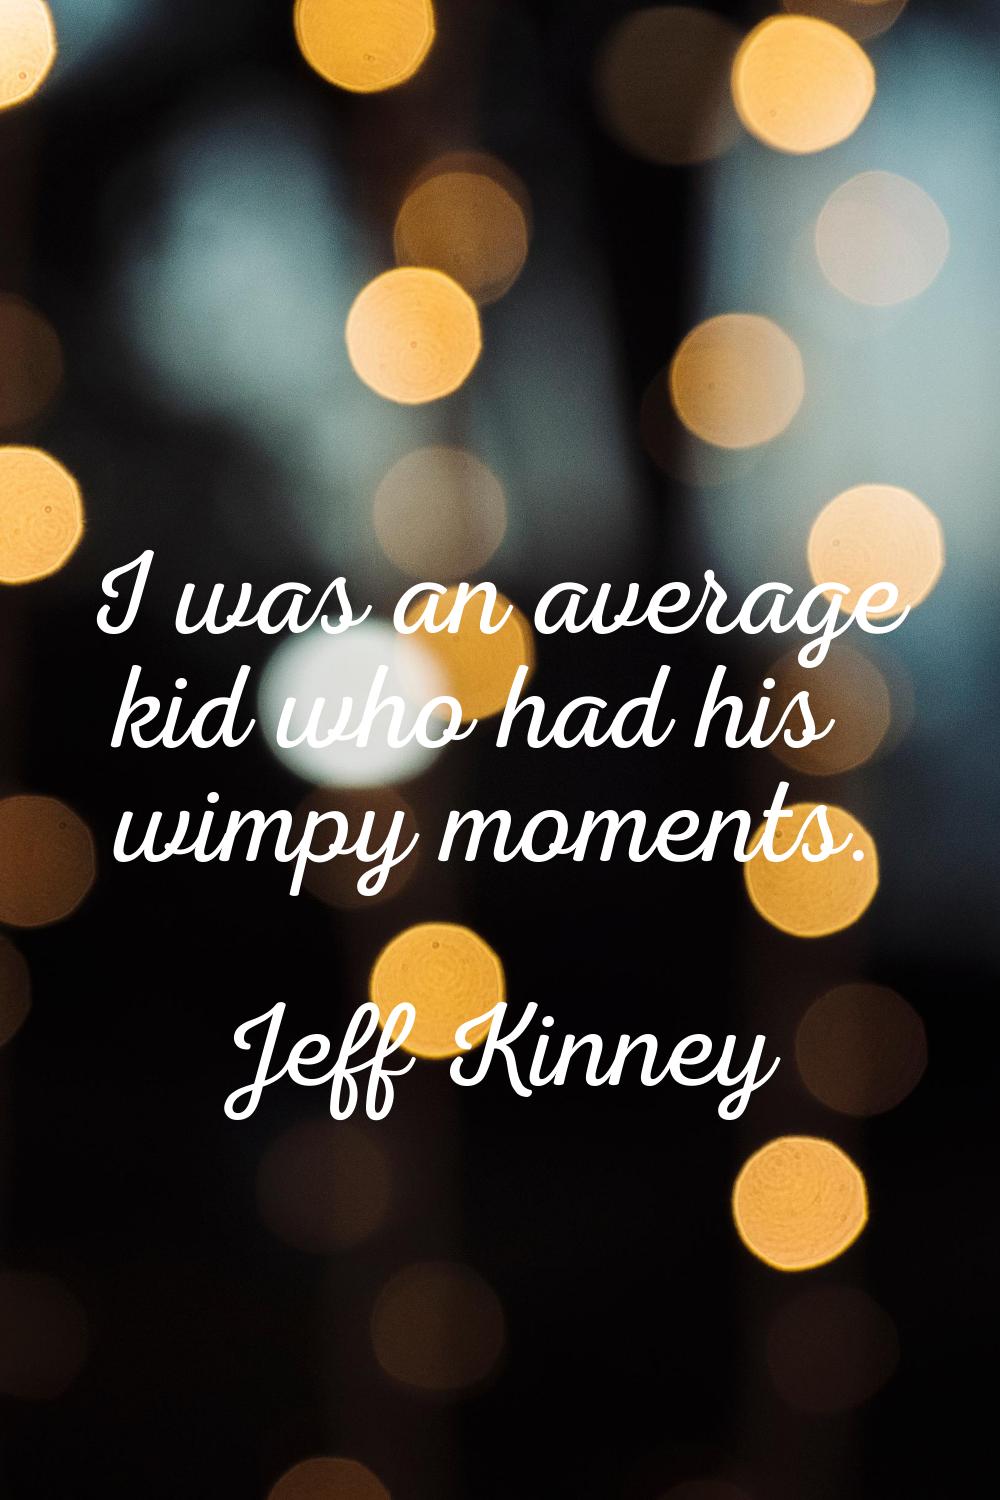 I was an average kid who had his wimpy moments.